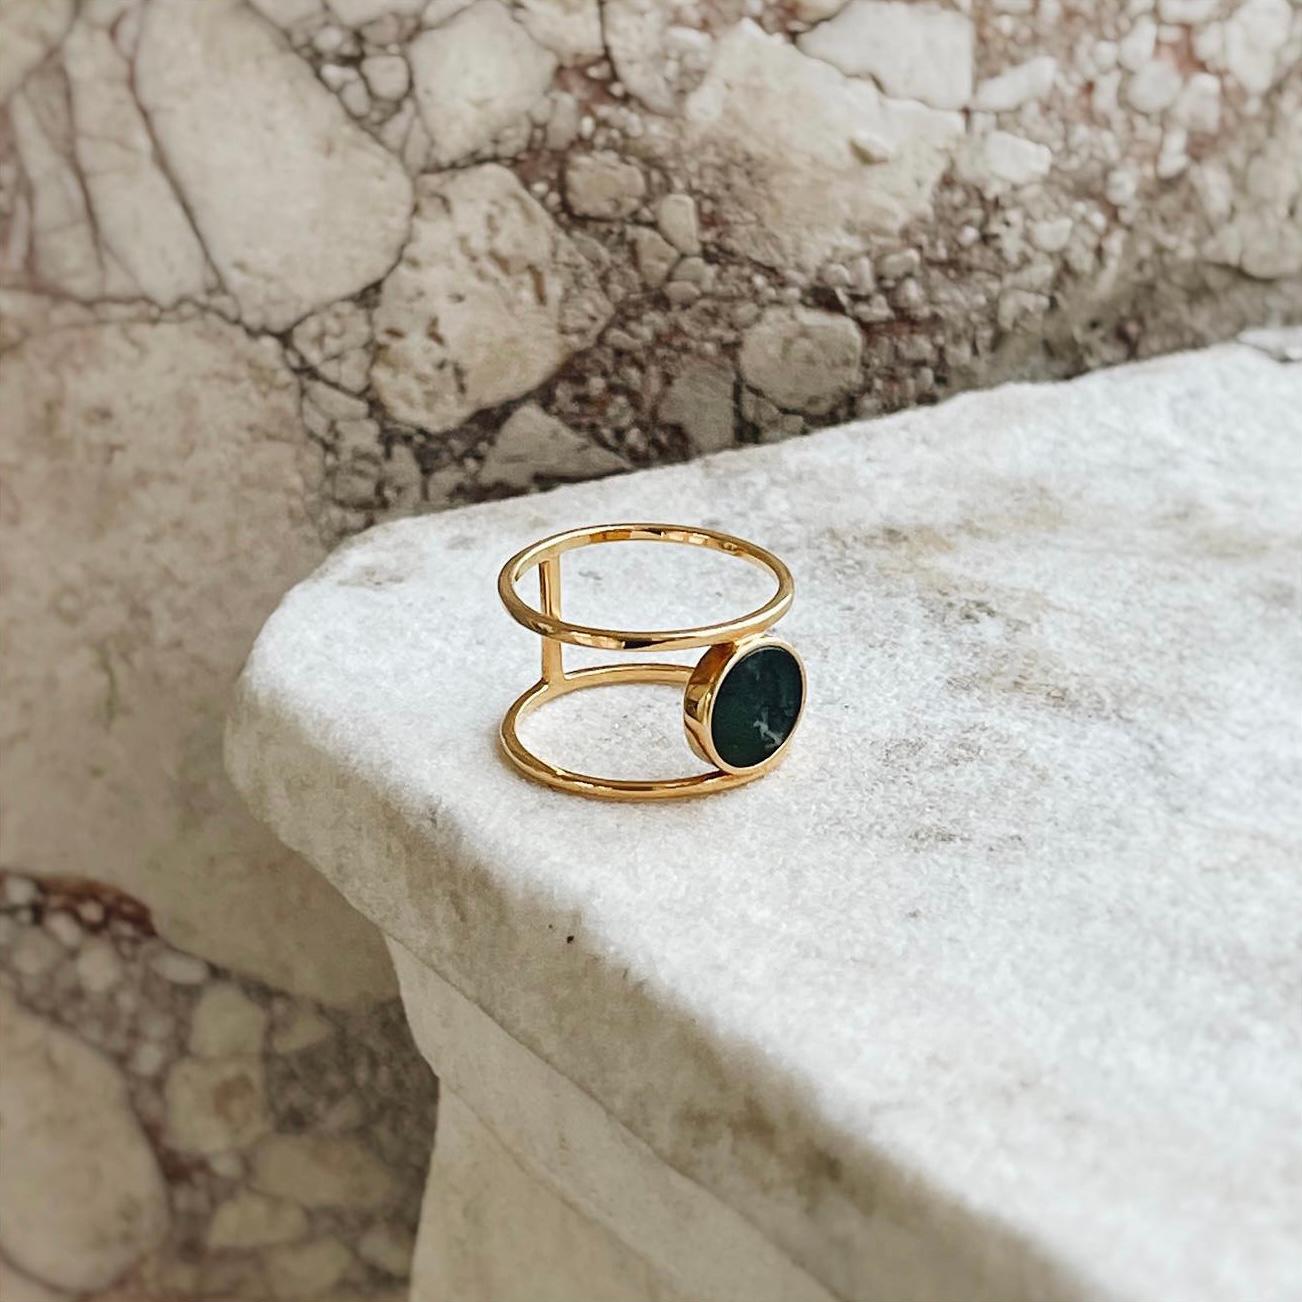 Discover our captivating bestseller ring adorned with a stunning green stone that is sure to capture your heart. Its unique design, featuring double rings, effortlessly blends simplicity and modernity, allowing you to express your personal